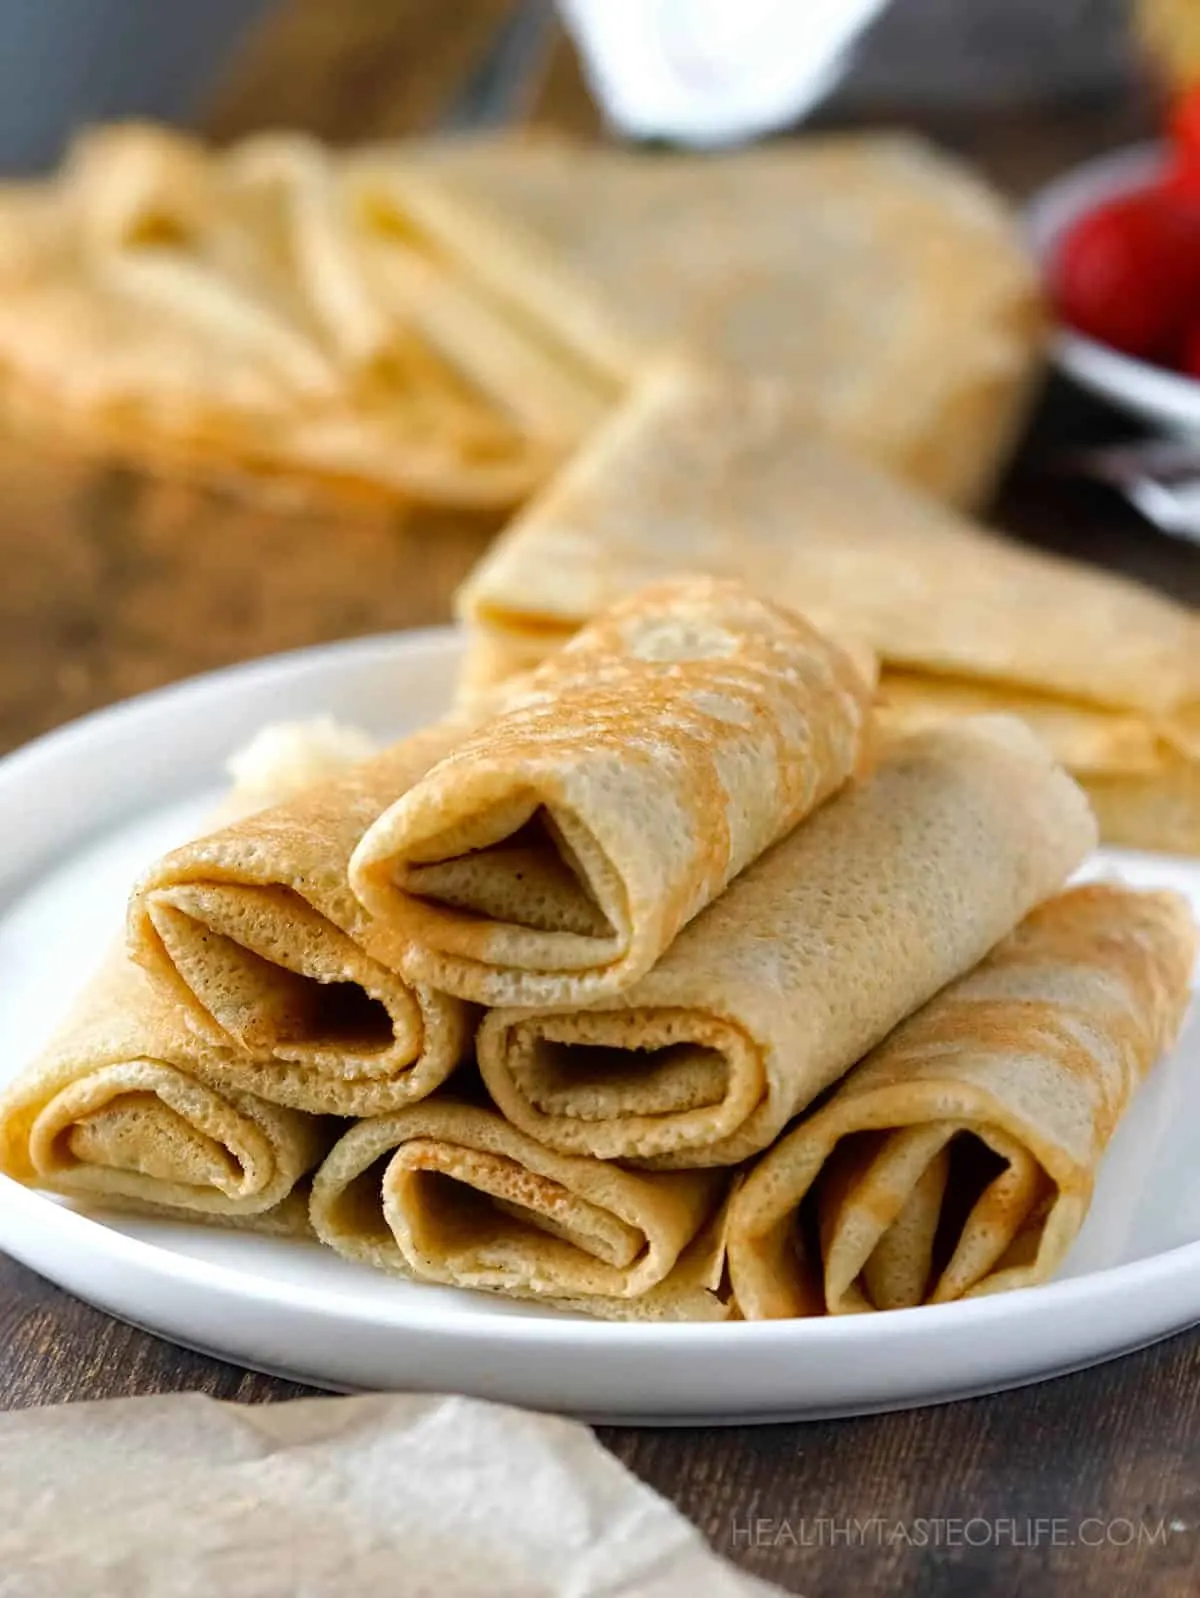 Thin pliable gluten free crepes rolled up on a plate.